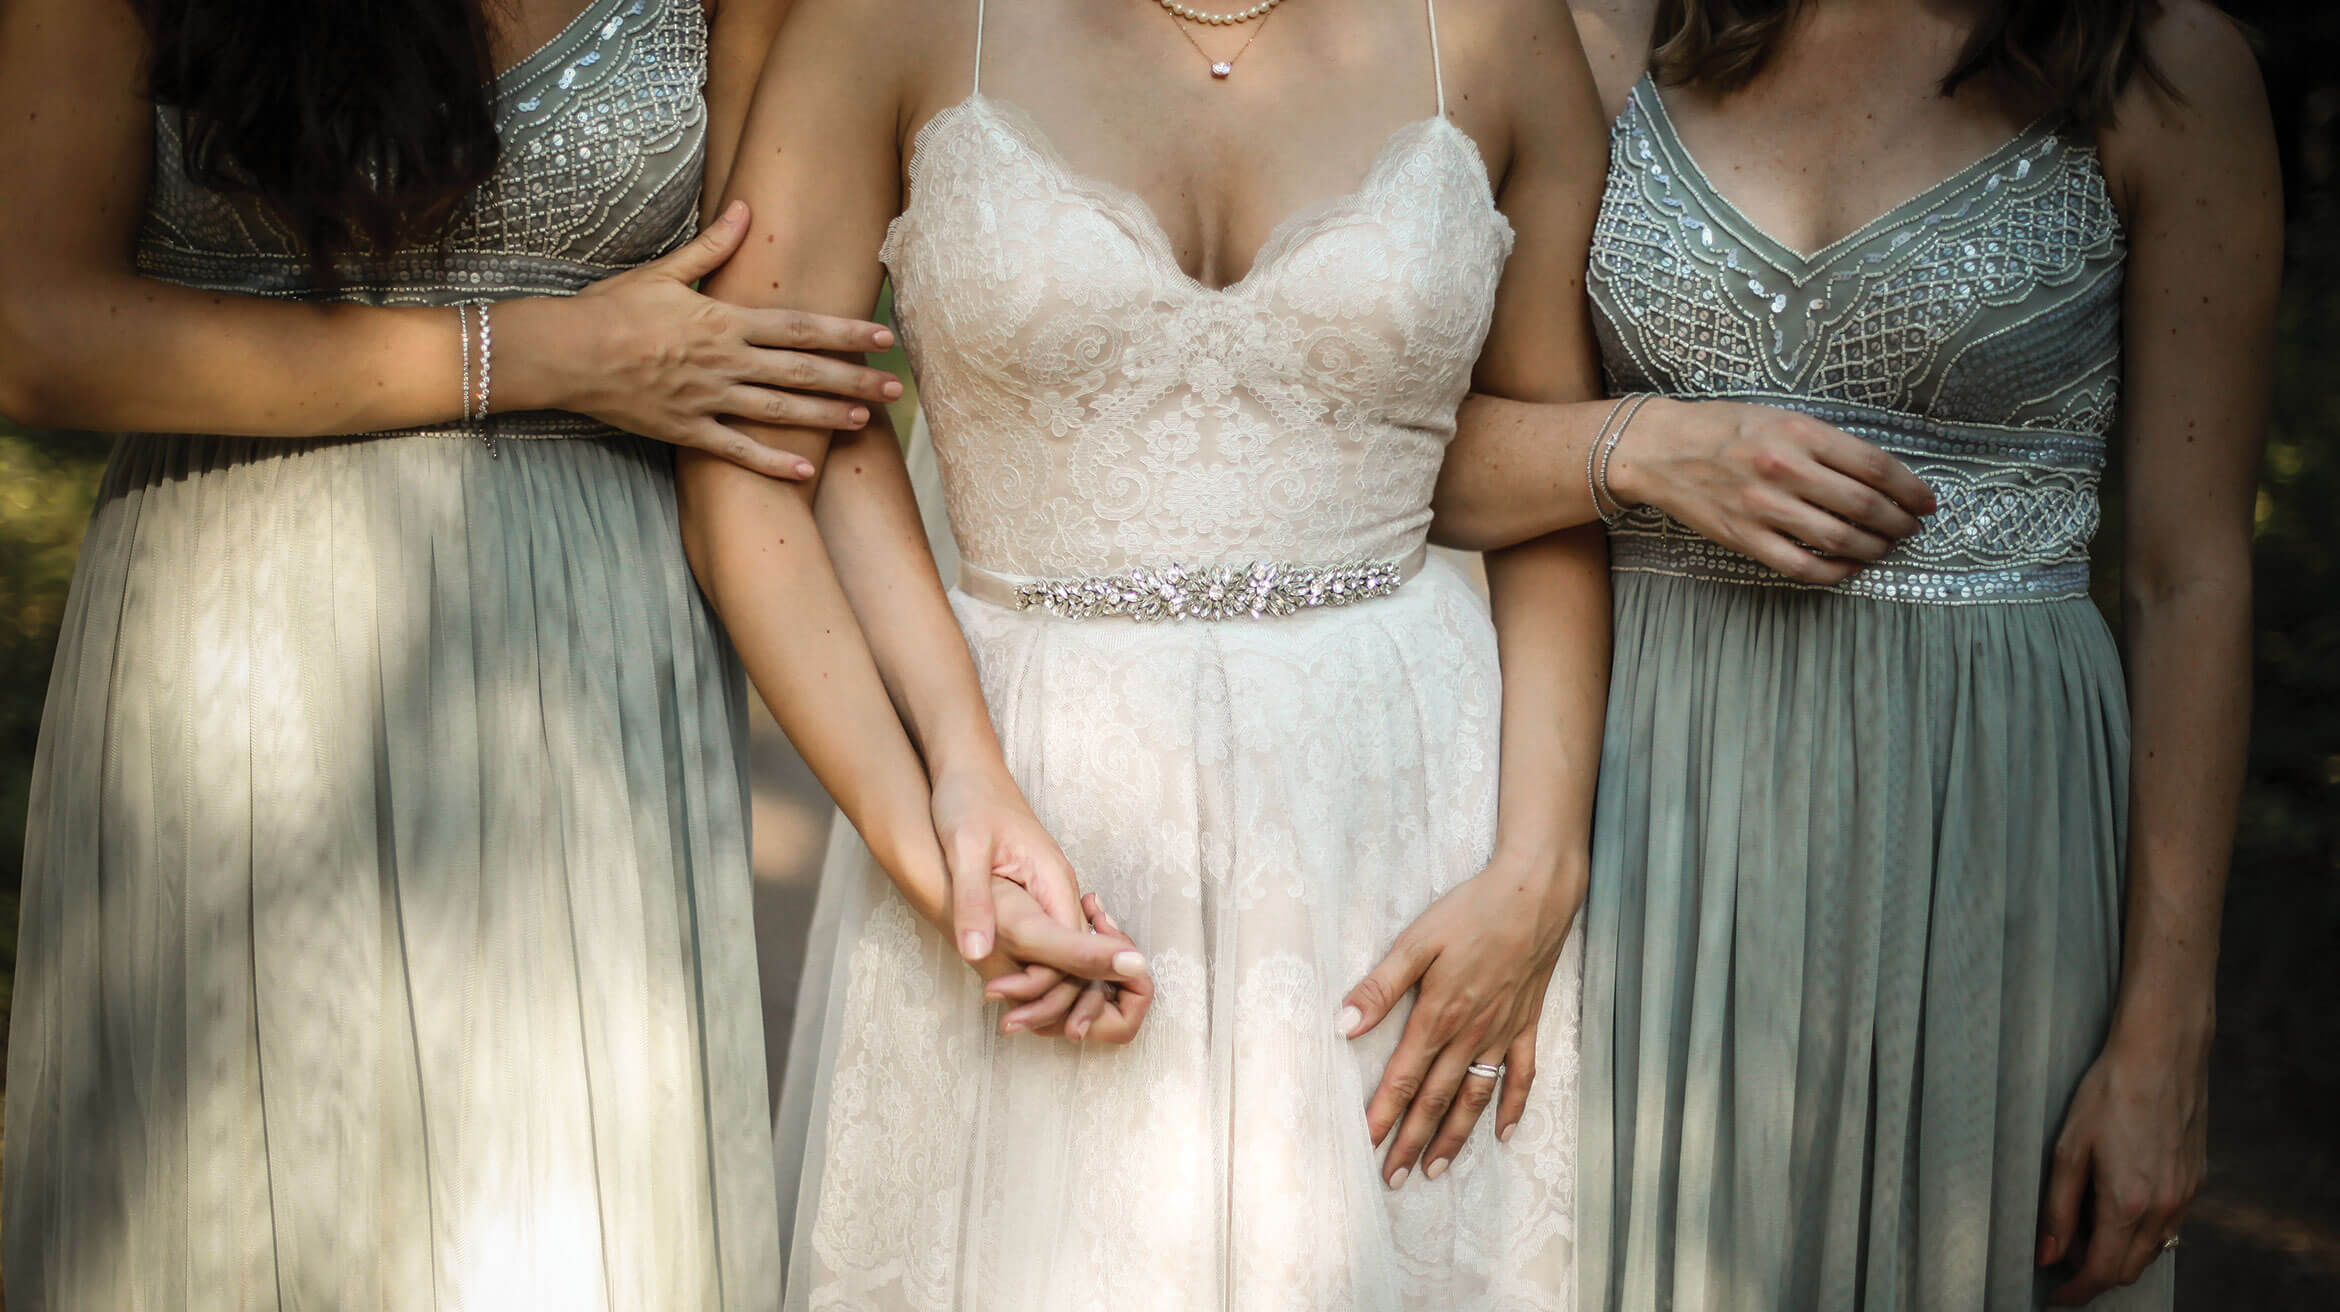 A bride and two bridesmaids holding hands before the ceremony.